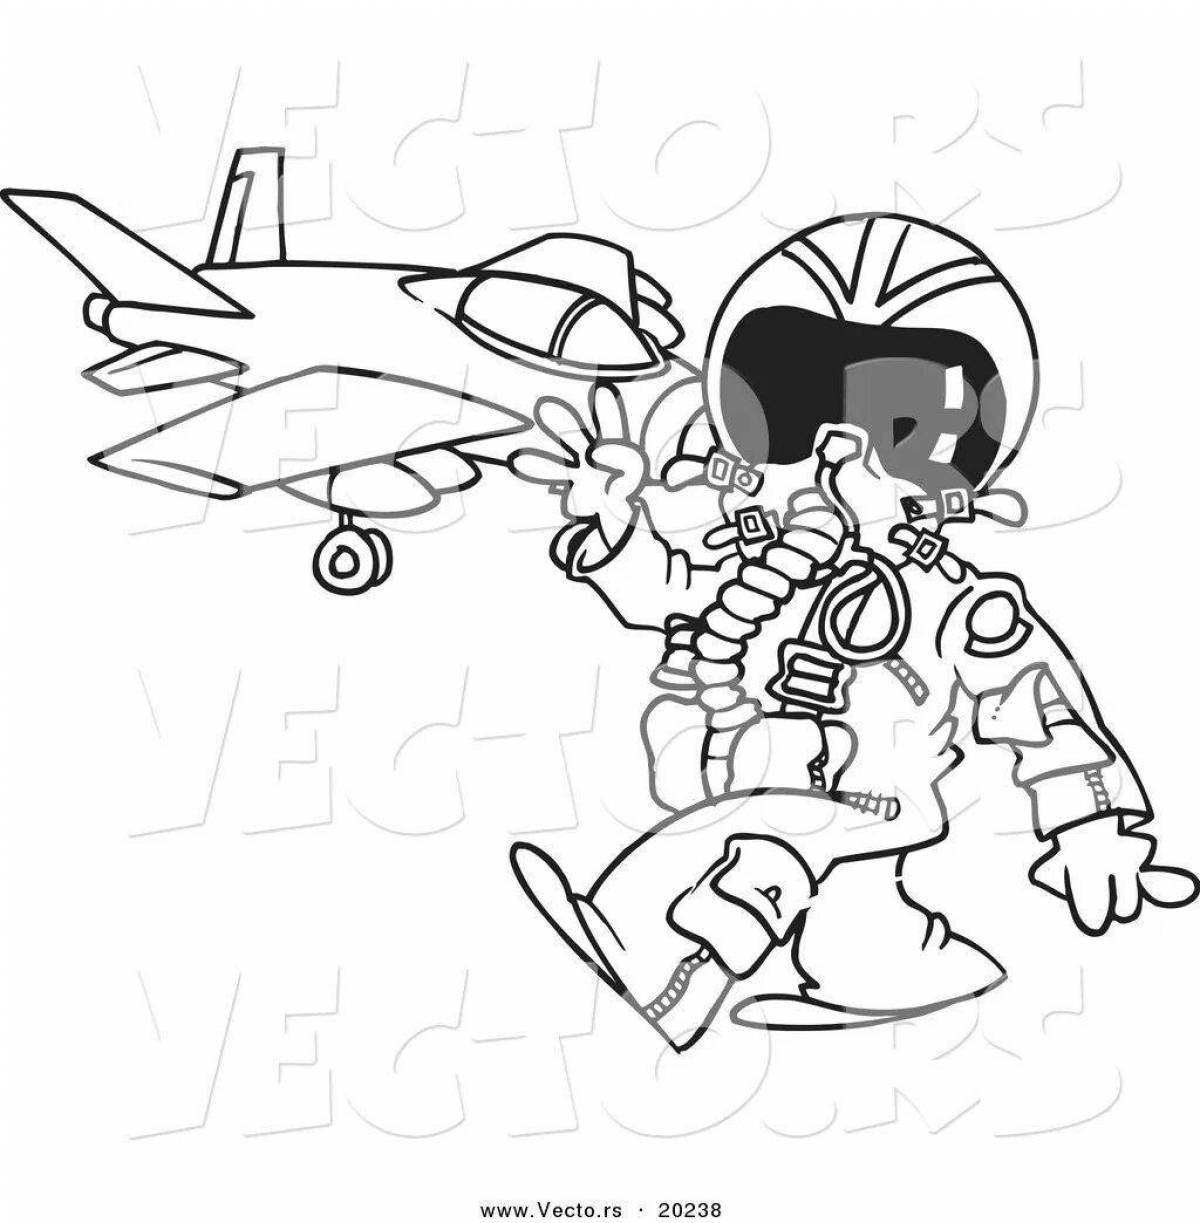 Cute military pilot coloring pages for kids